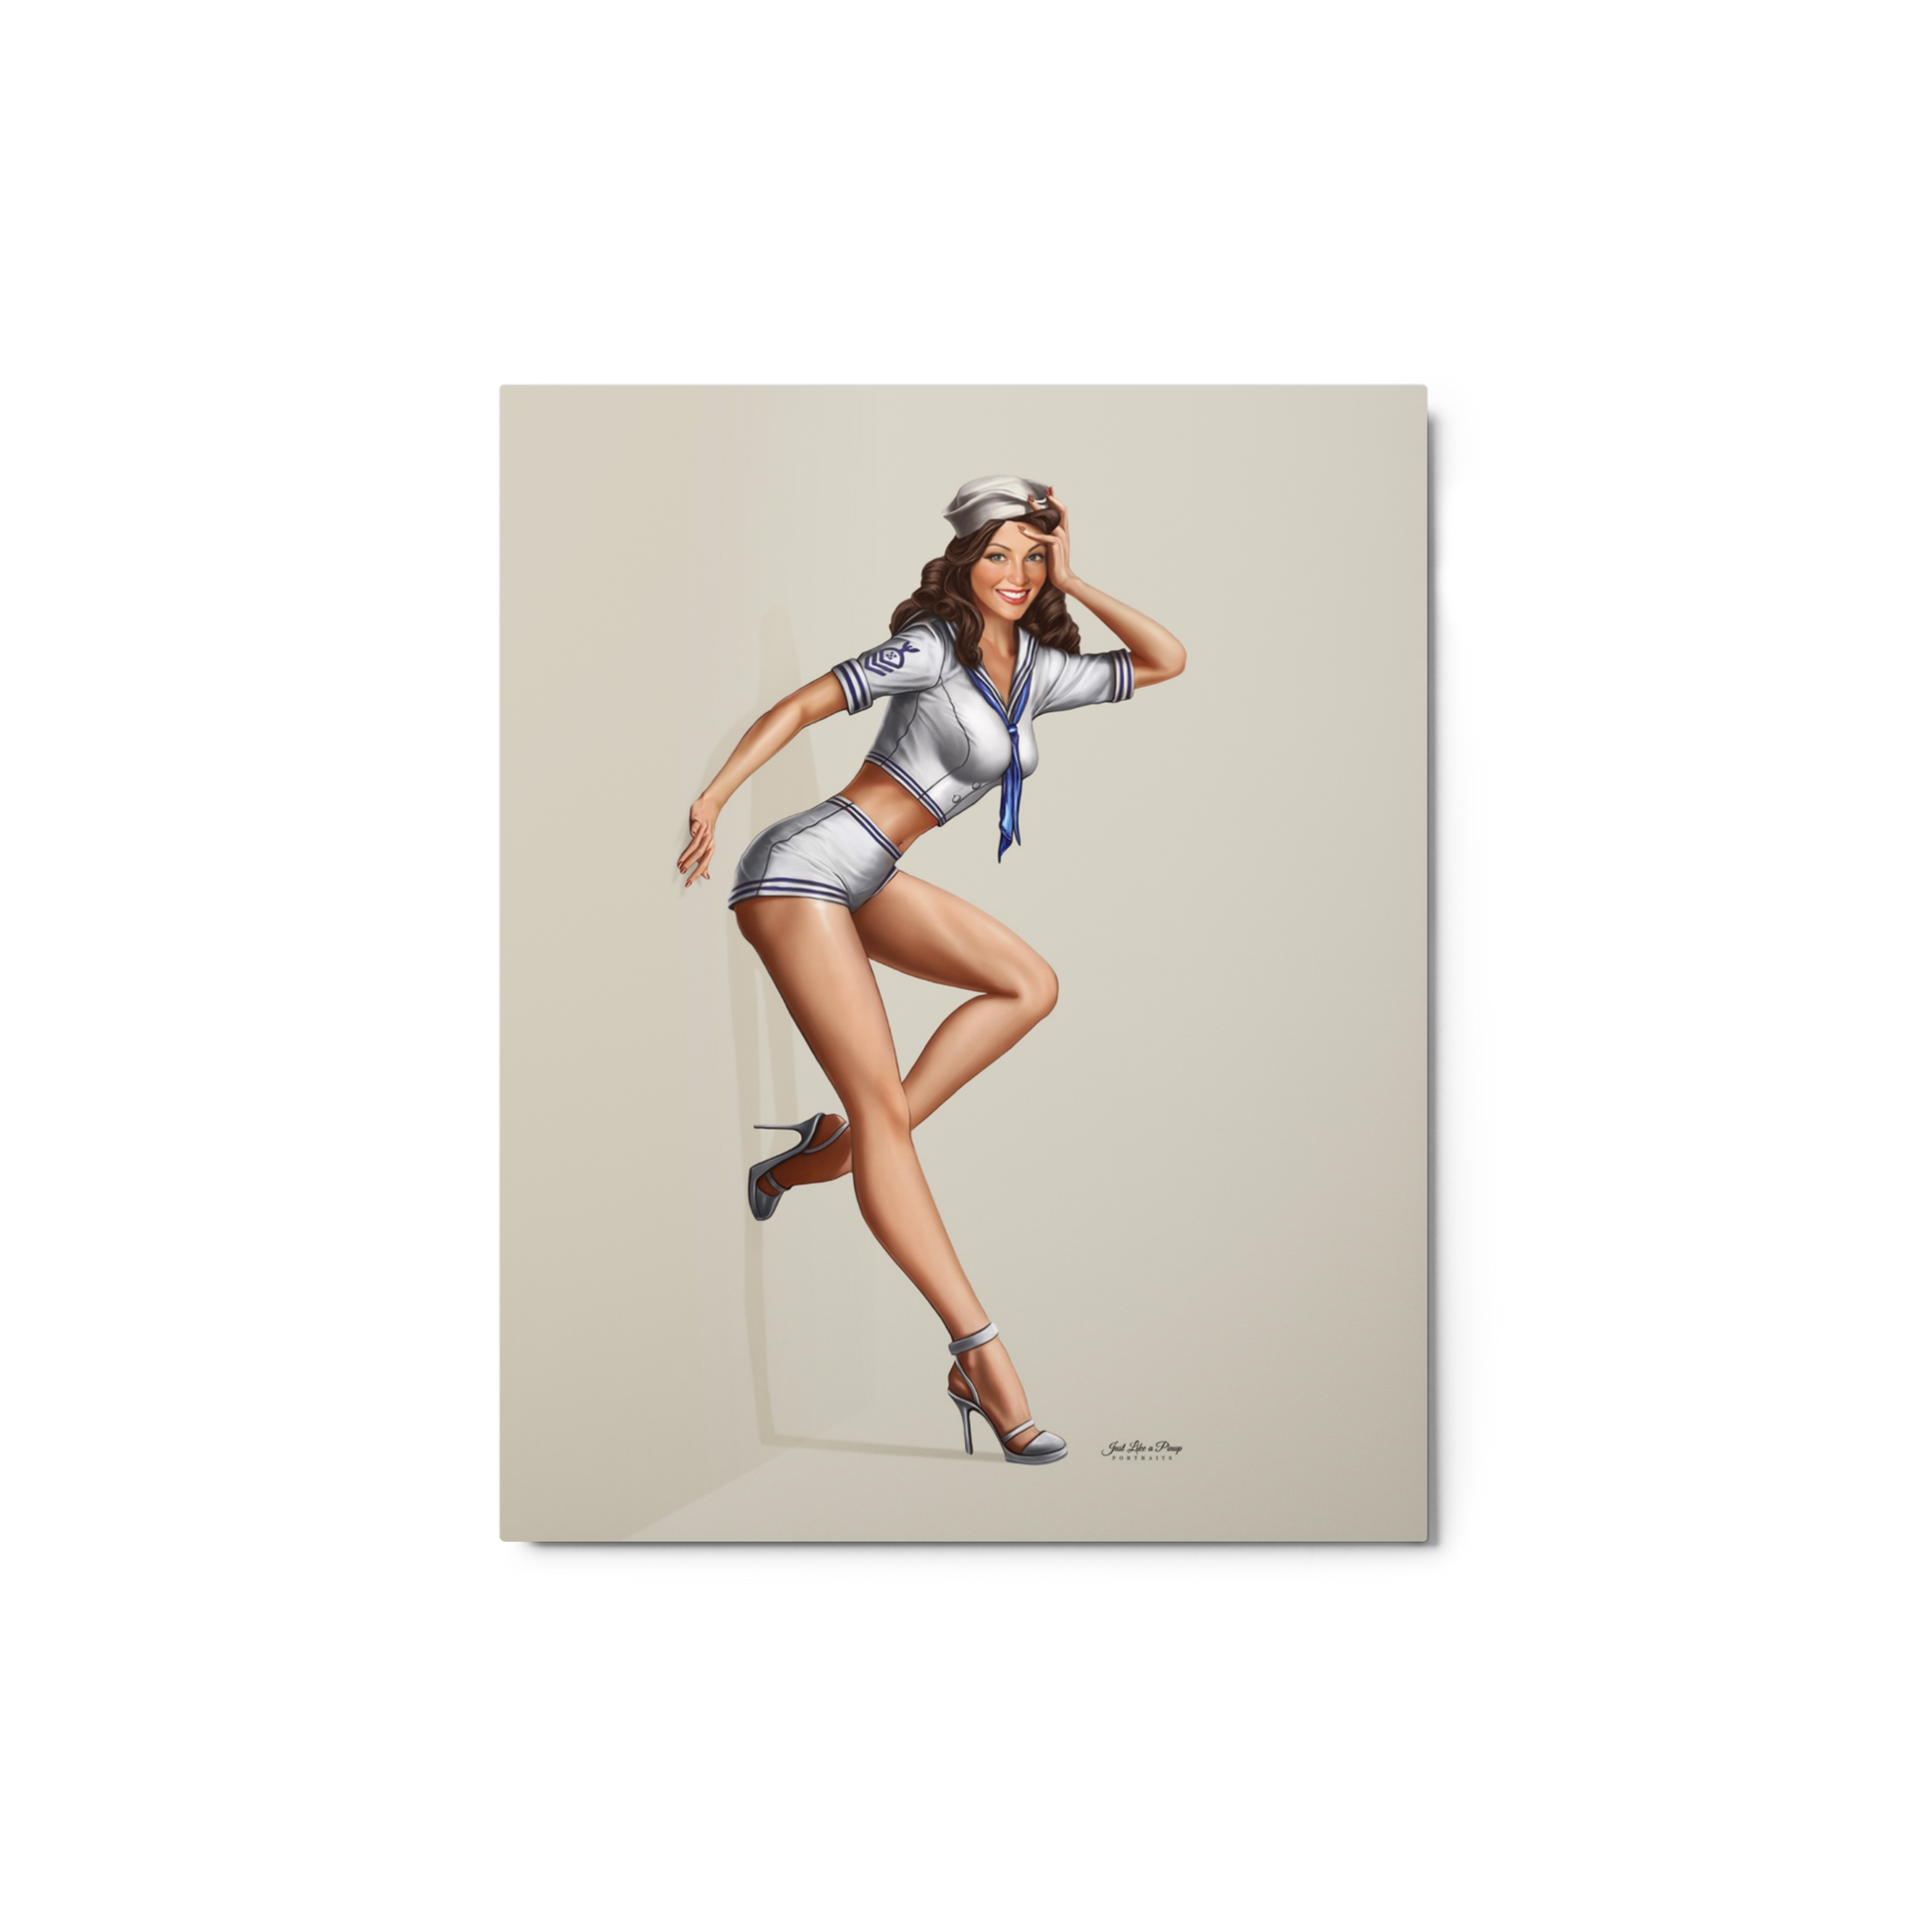 Personalized Metal Prints - Just Like A Pinup